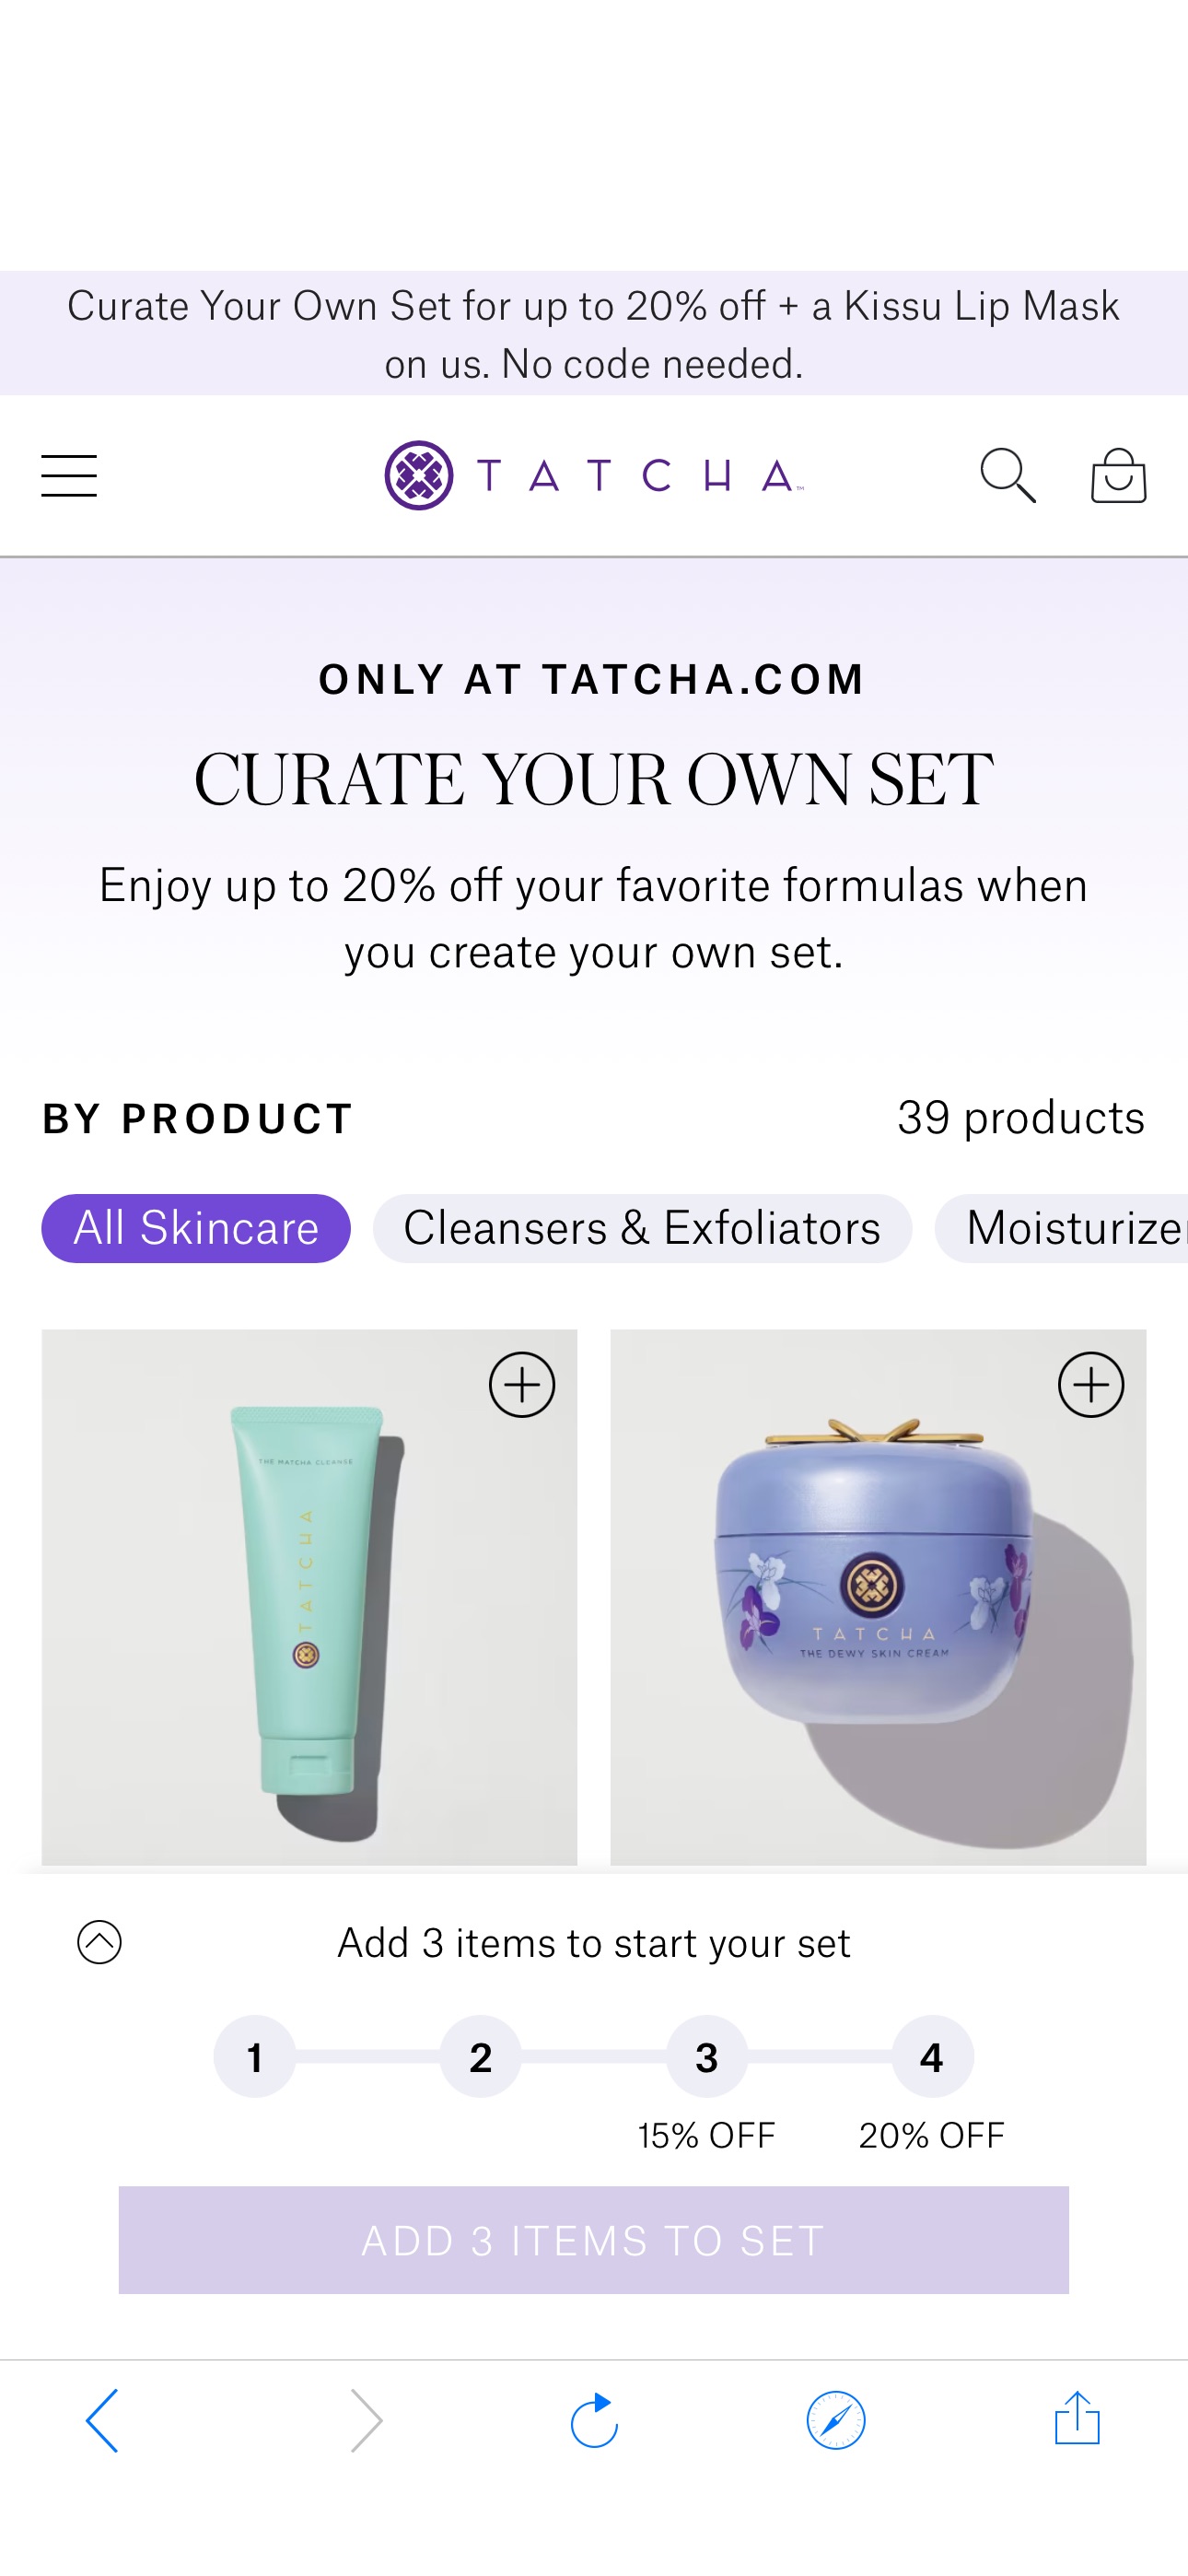 Curate your own set | Tatcha Curate Your Own Set for up to 20% off + a Kissu Lip Mask on us. No code needed.